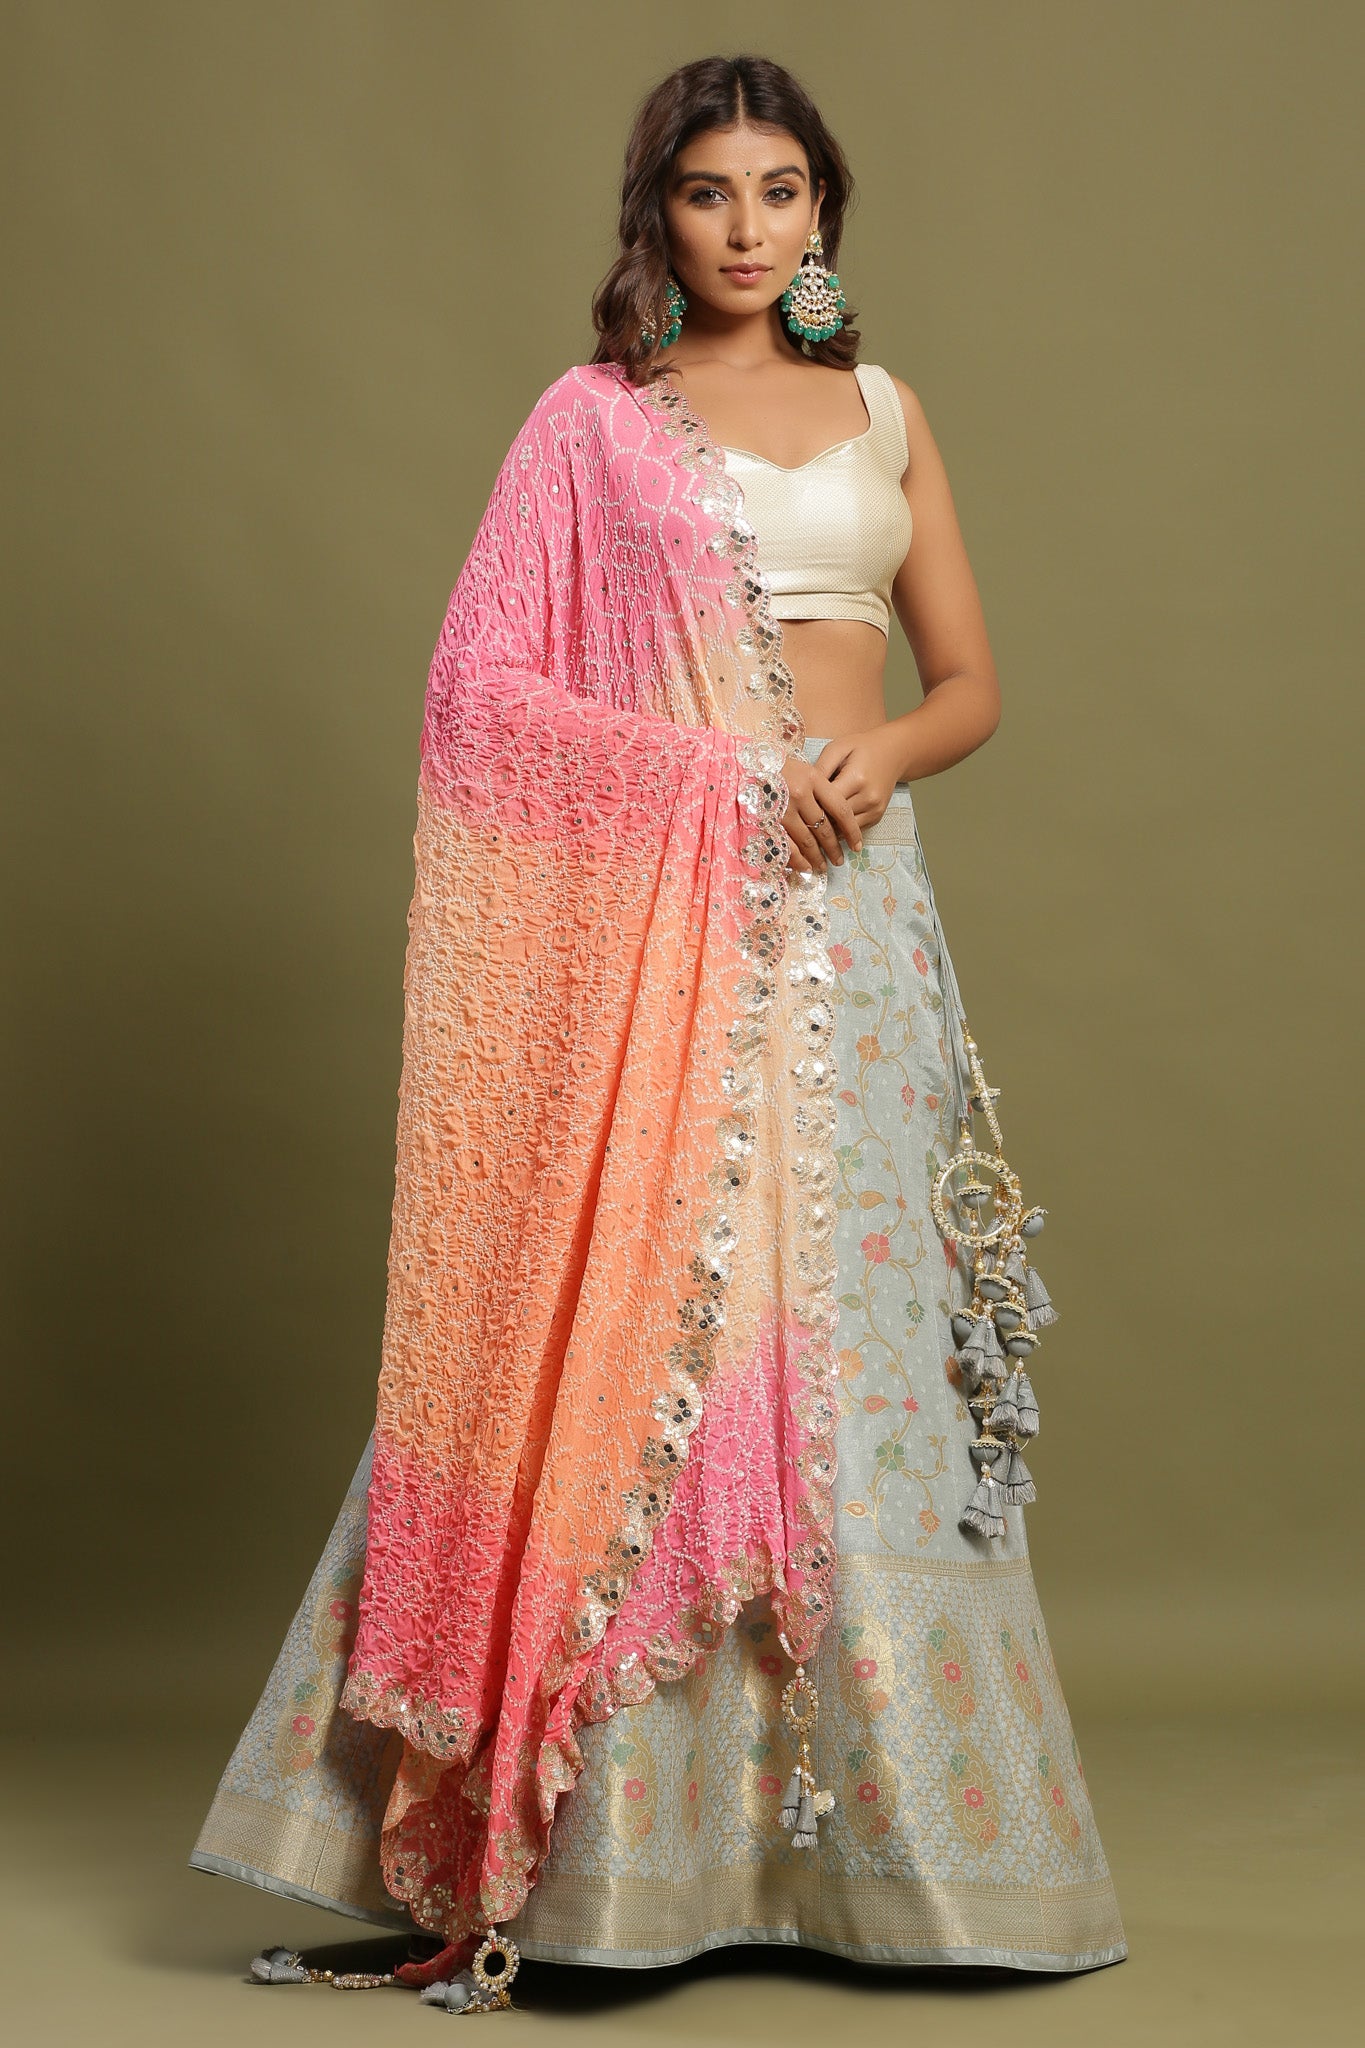 Shop a Beautiful grey silk lehenga with a multicolor dupatta. The lehenga is perfect for weddings and sangeet parties. It is crafted in silk with intrinsic floral self-design work, tassels, and a beautiful off-white blouse. Shop online from Pure Elegance.